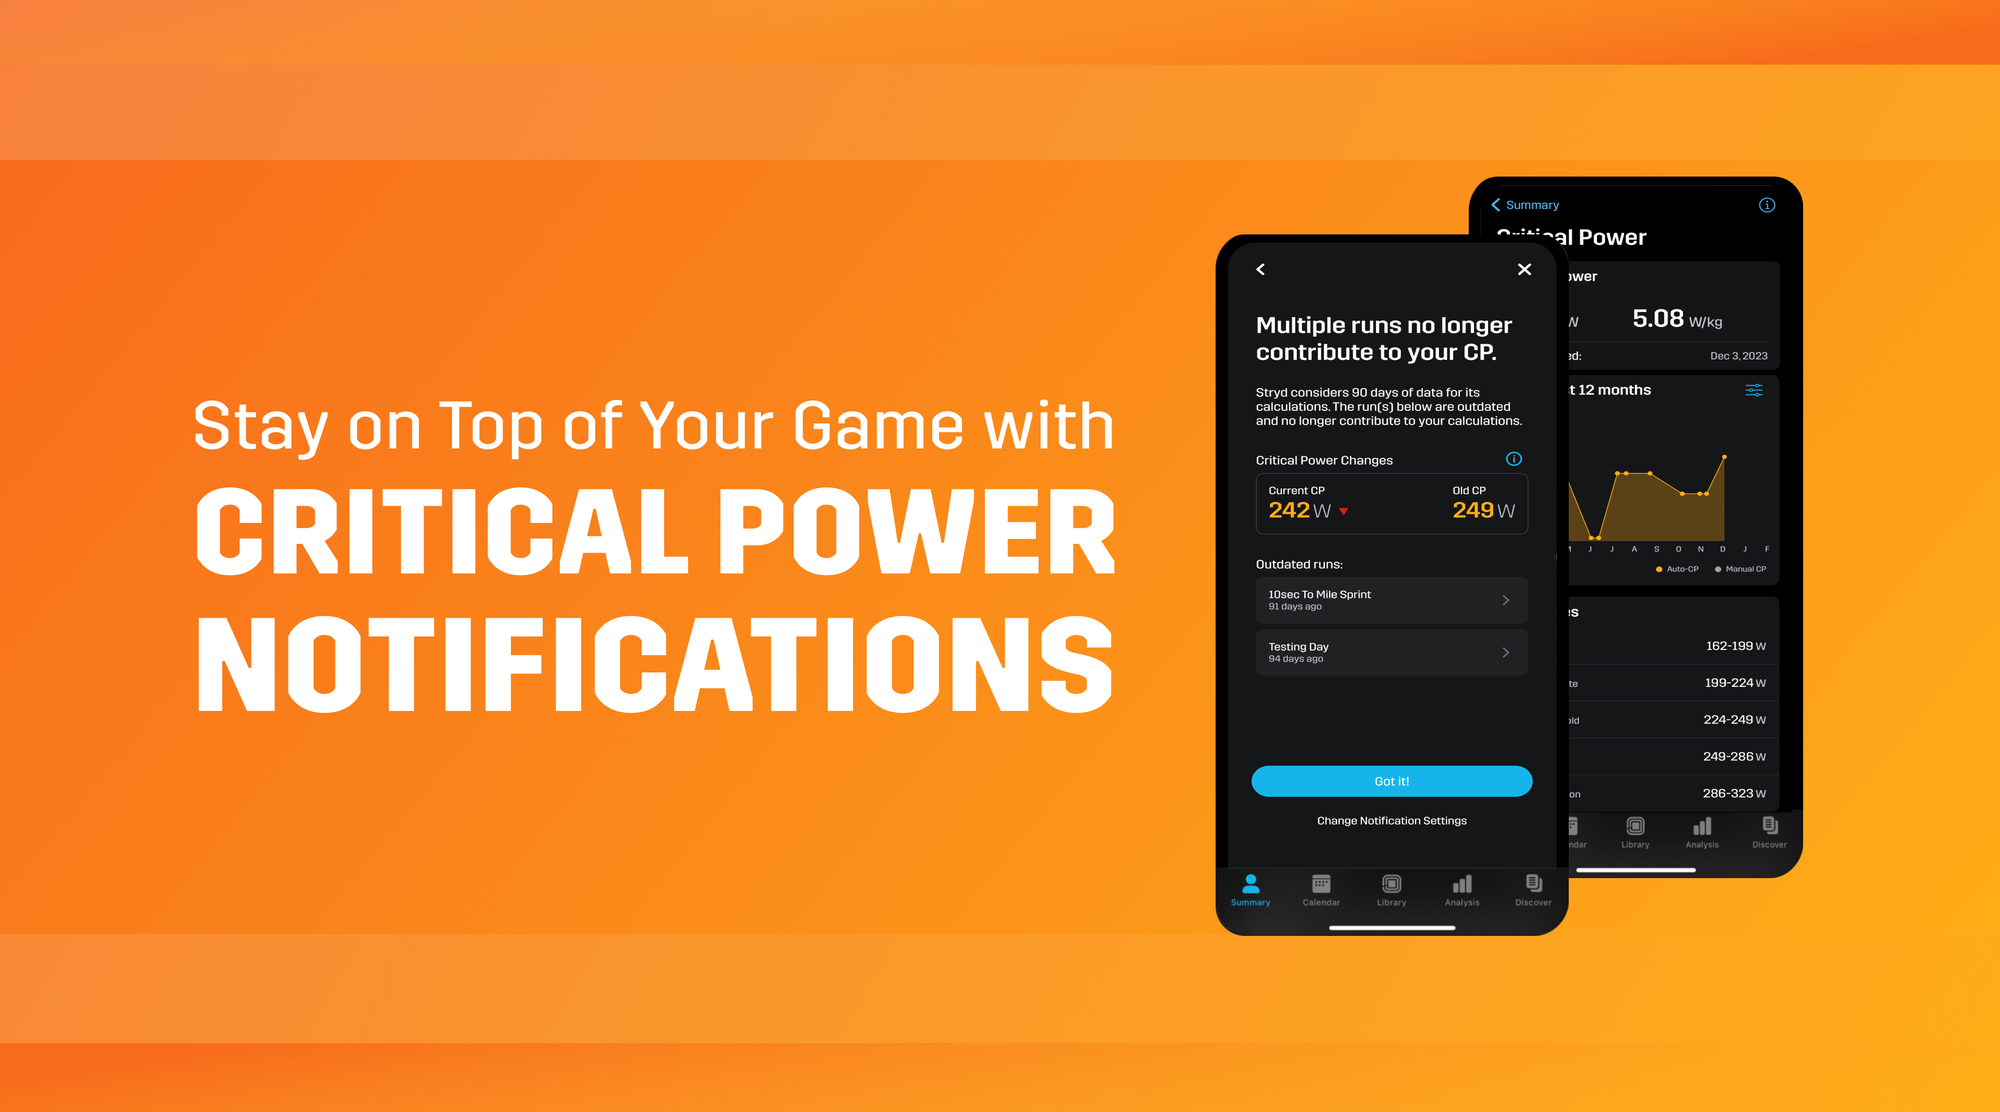 Stay on Top of Your Game with Critical Power Notifications